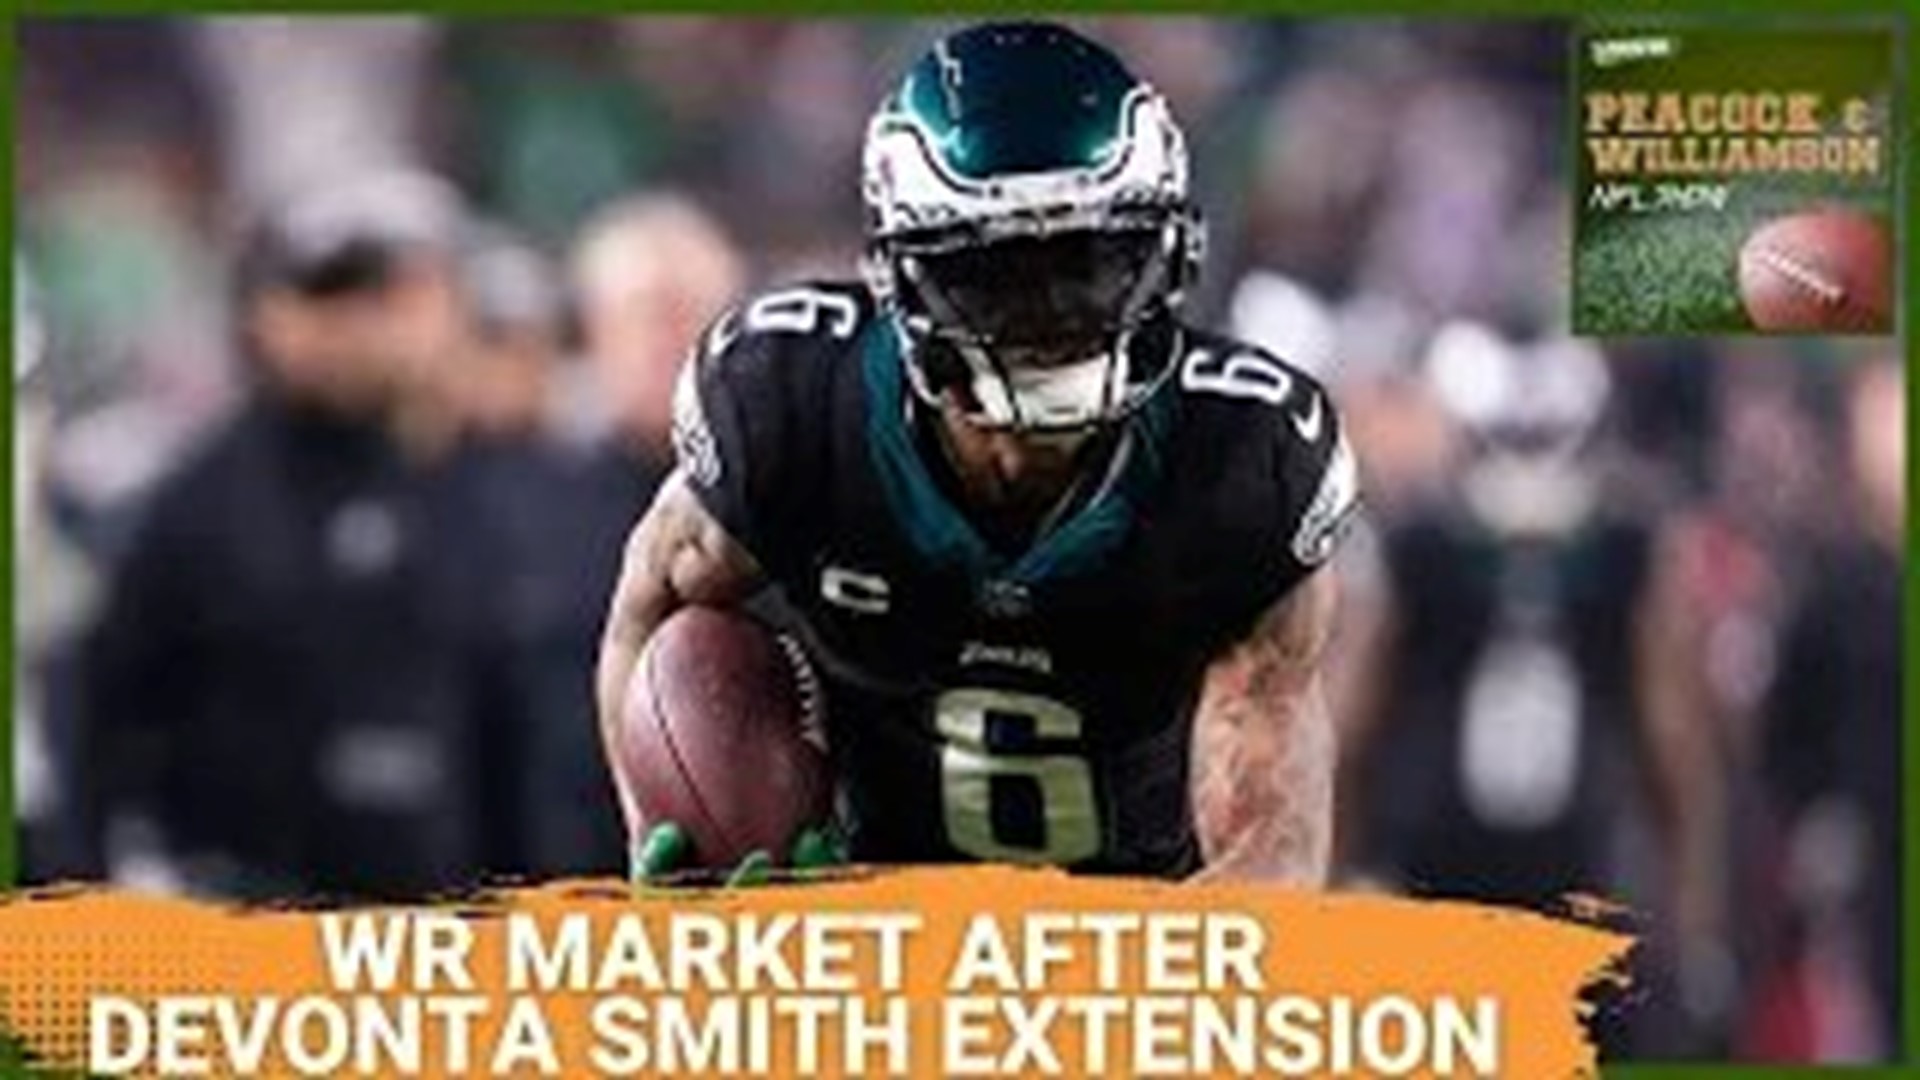 The Philadelphia Eagles have locked up wide receiver DeVonta Smith to an extension through 2028. What does Smith's contract means for the wide receiver market?